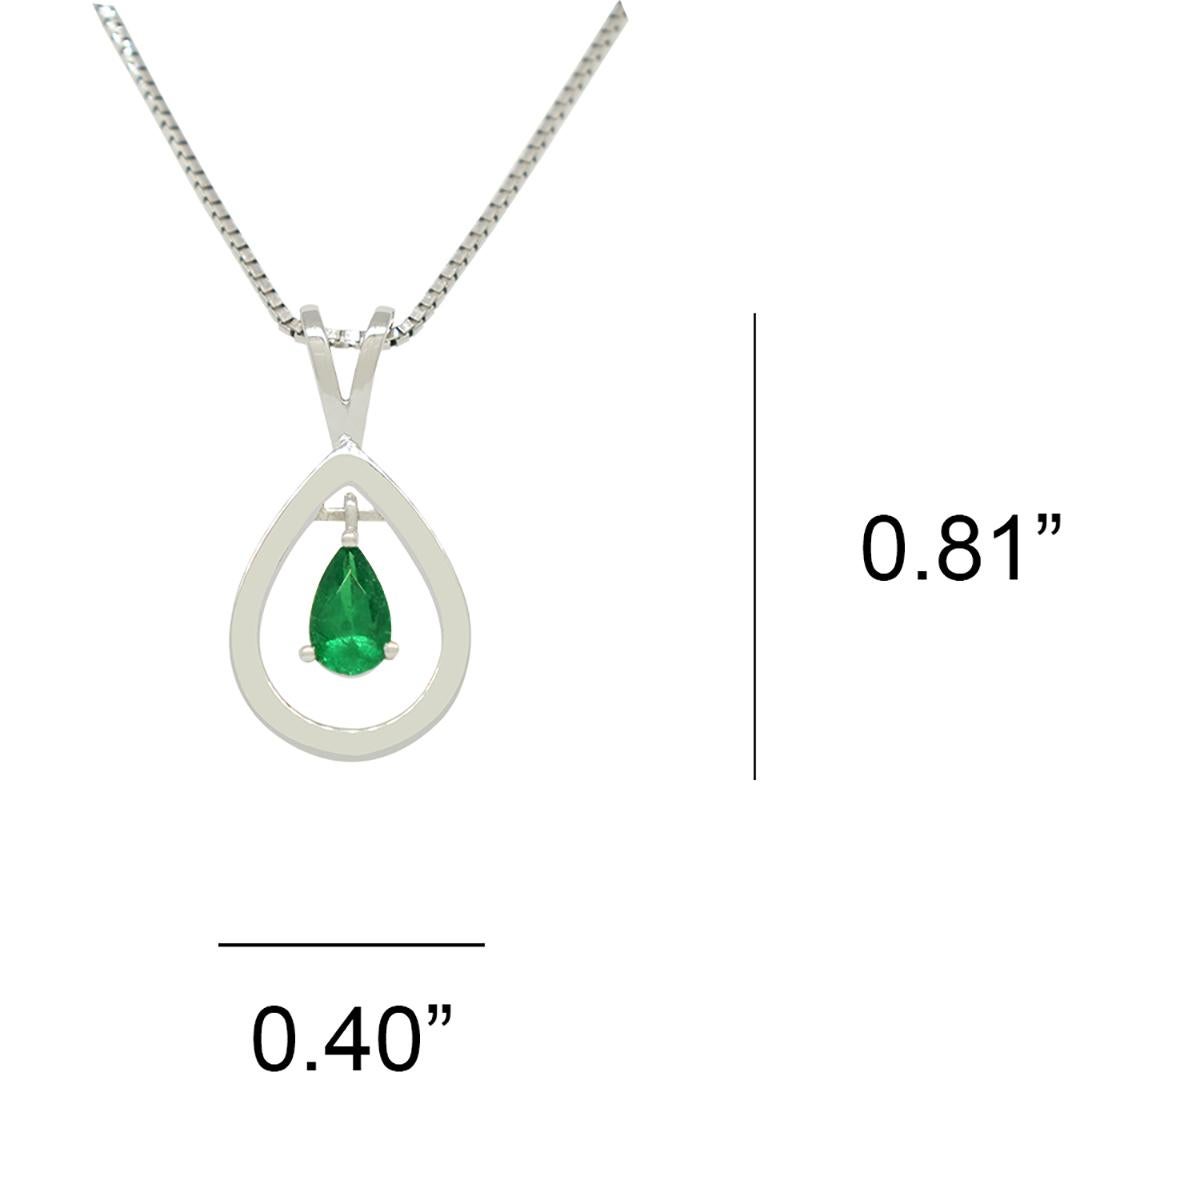 Teardrop Emerald Pendant Necklace with Small Pear Shape Emerald in White Gold In New Condition For Sale In Bradenton, FL